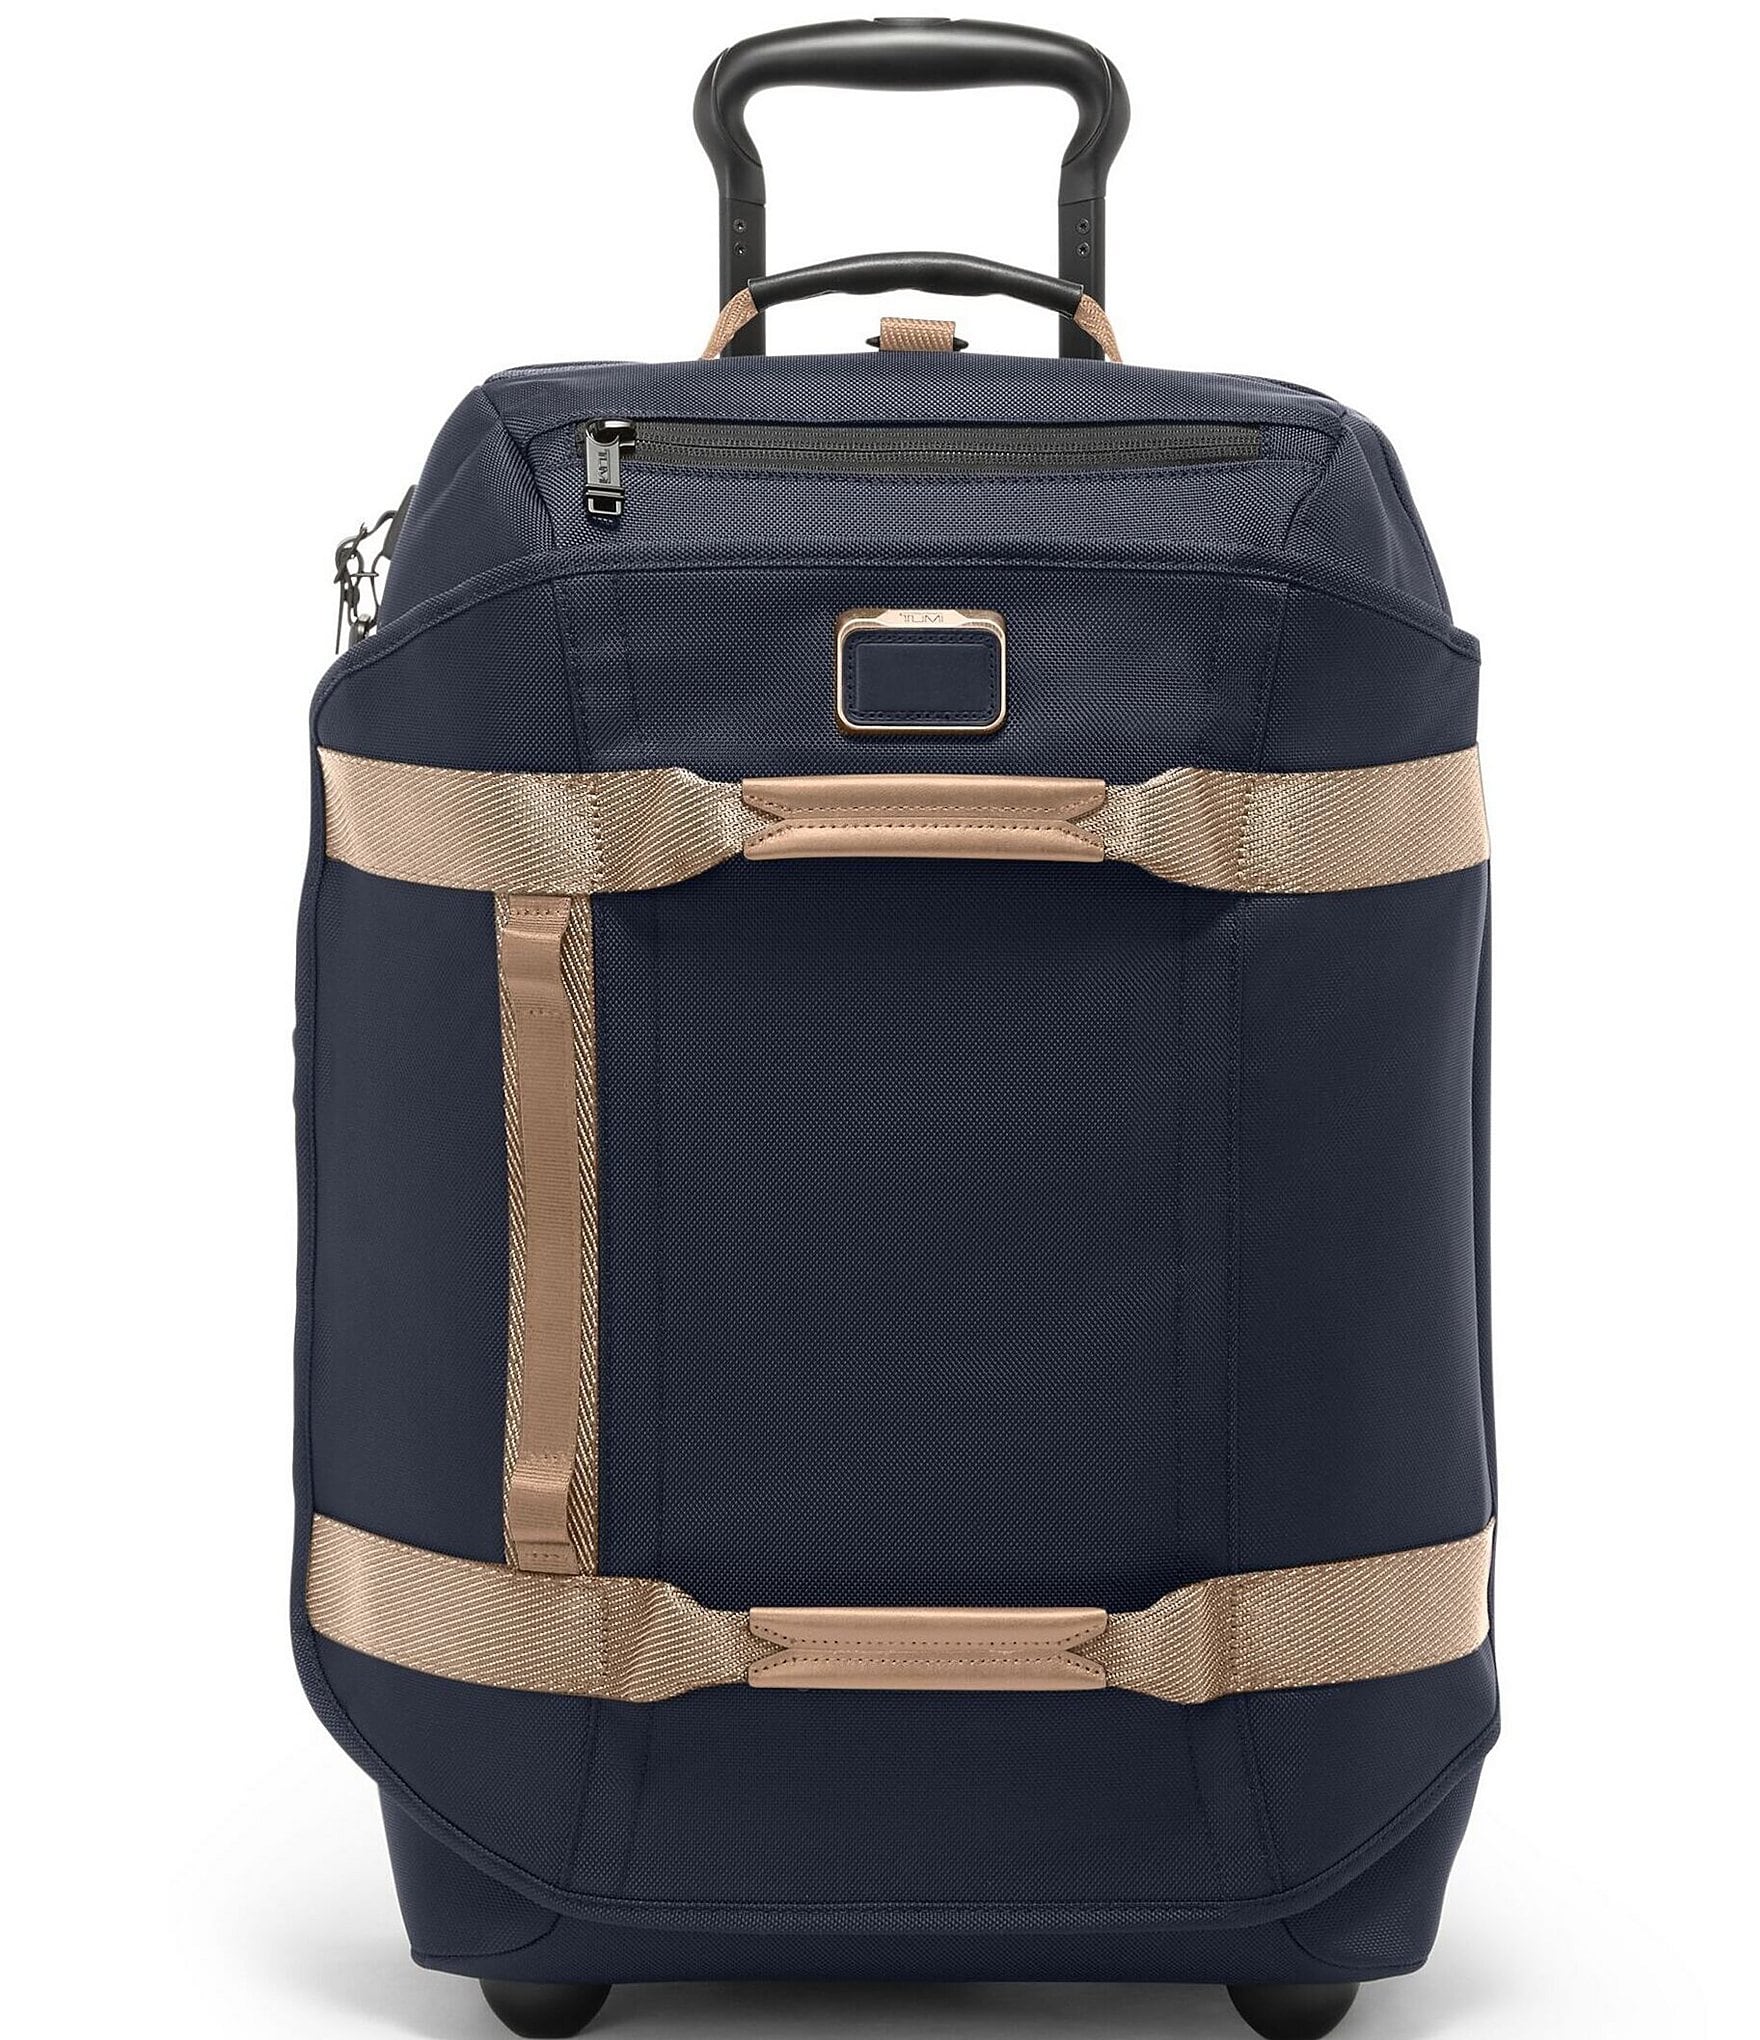 Luxury Luggage: TUMI's Luggage Bags in Association with Mini Cooper |  Lifestyle